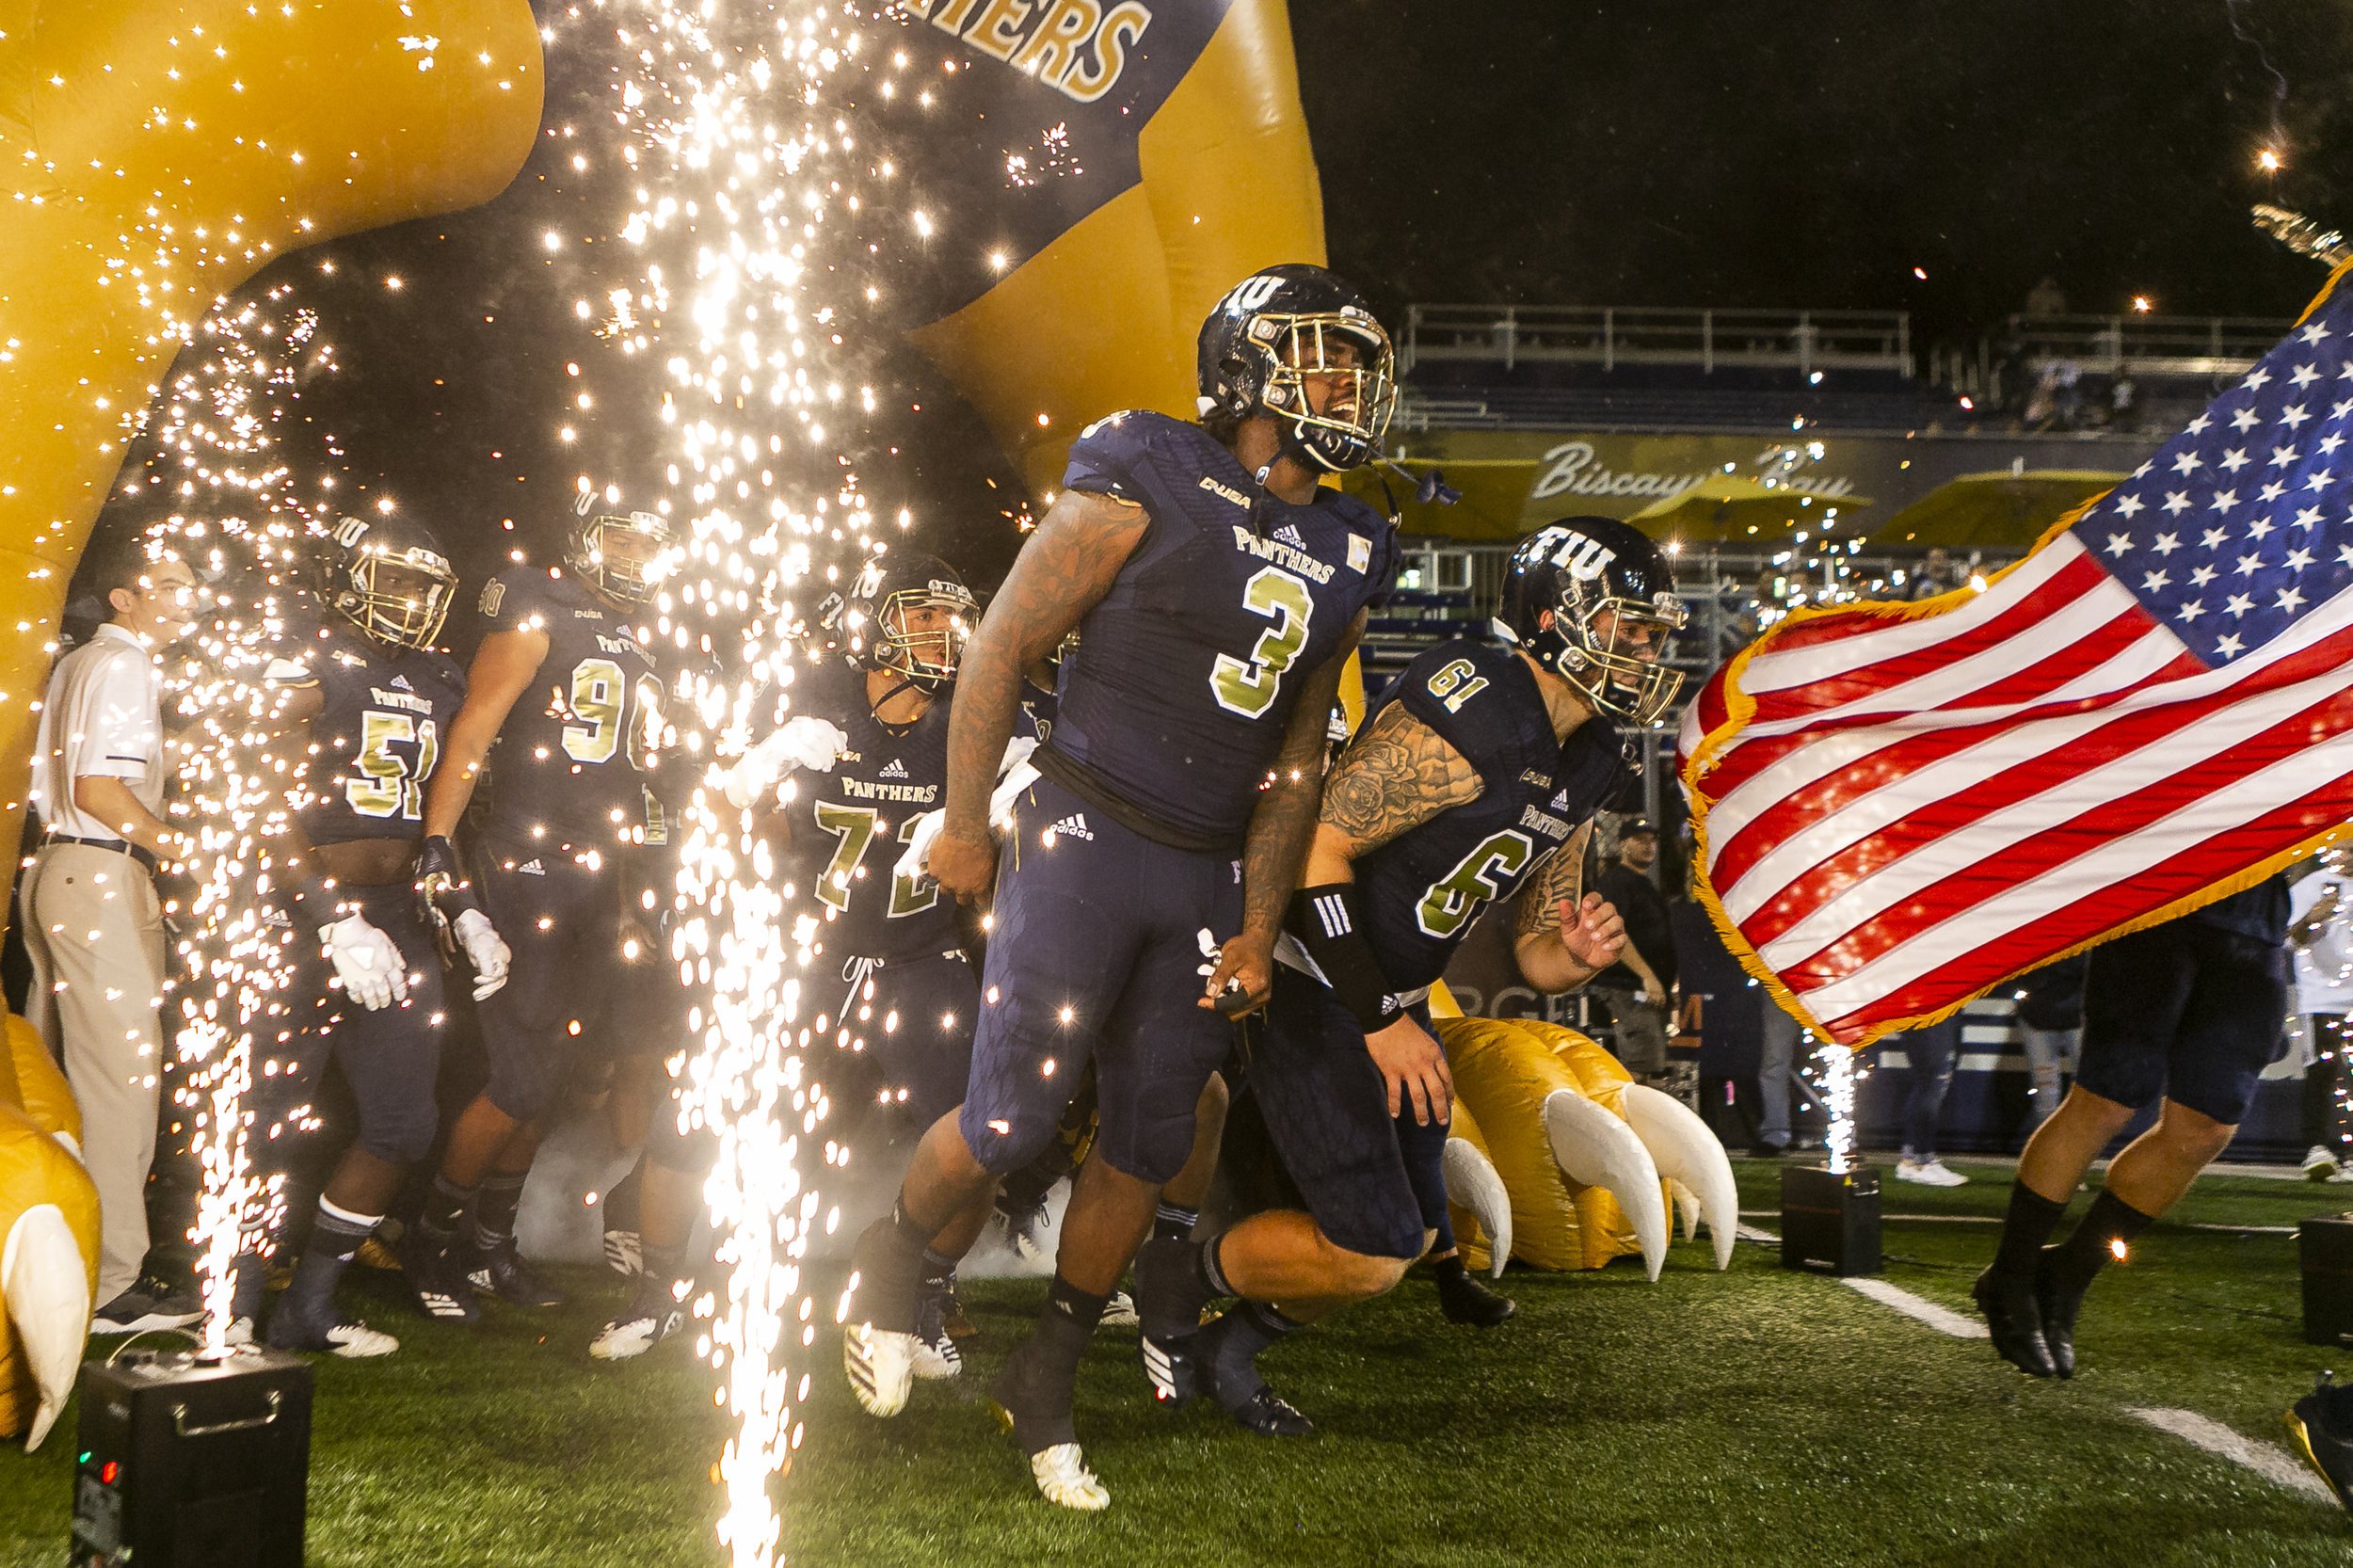  FIU linebacker Sage Lewis (3) makes his way to the field with his teammates before the start of a football game between Florida International University and Florida Atlantic University at the Riccardo Silva Stadium in Miami on Saturday, November 3, 